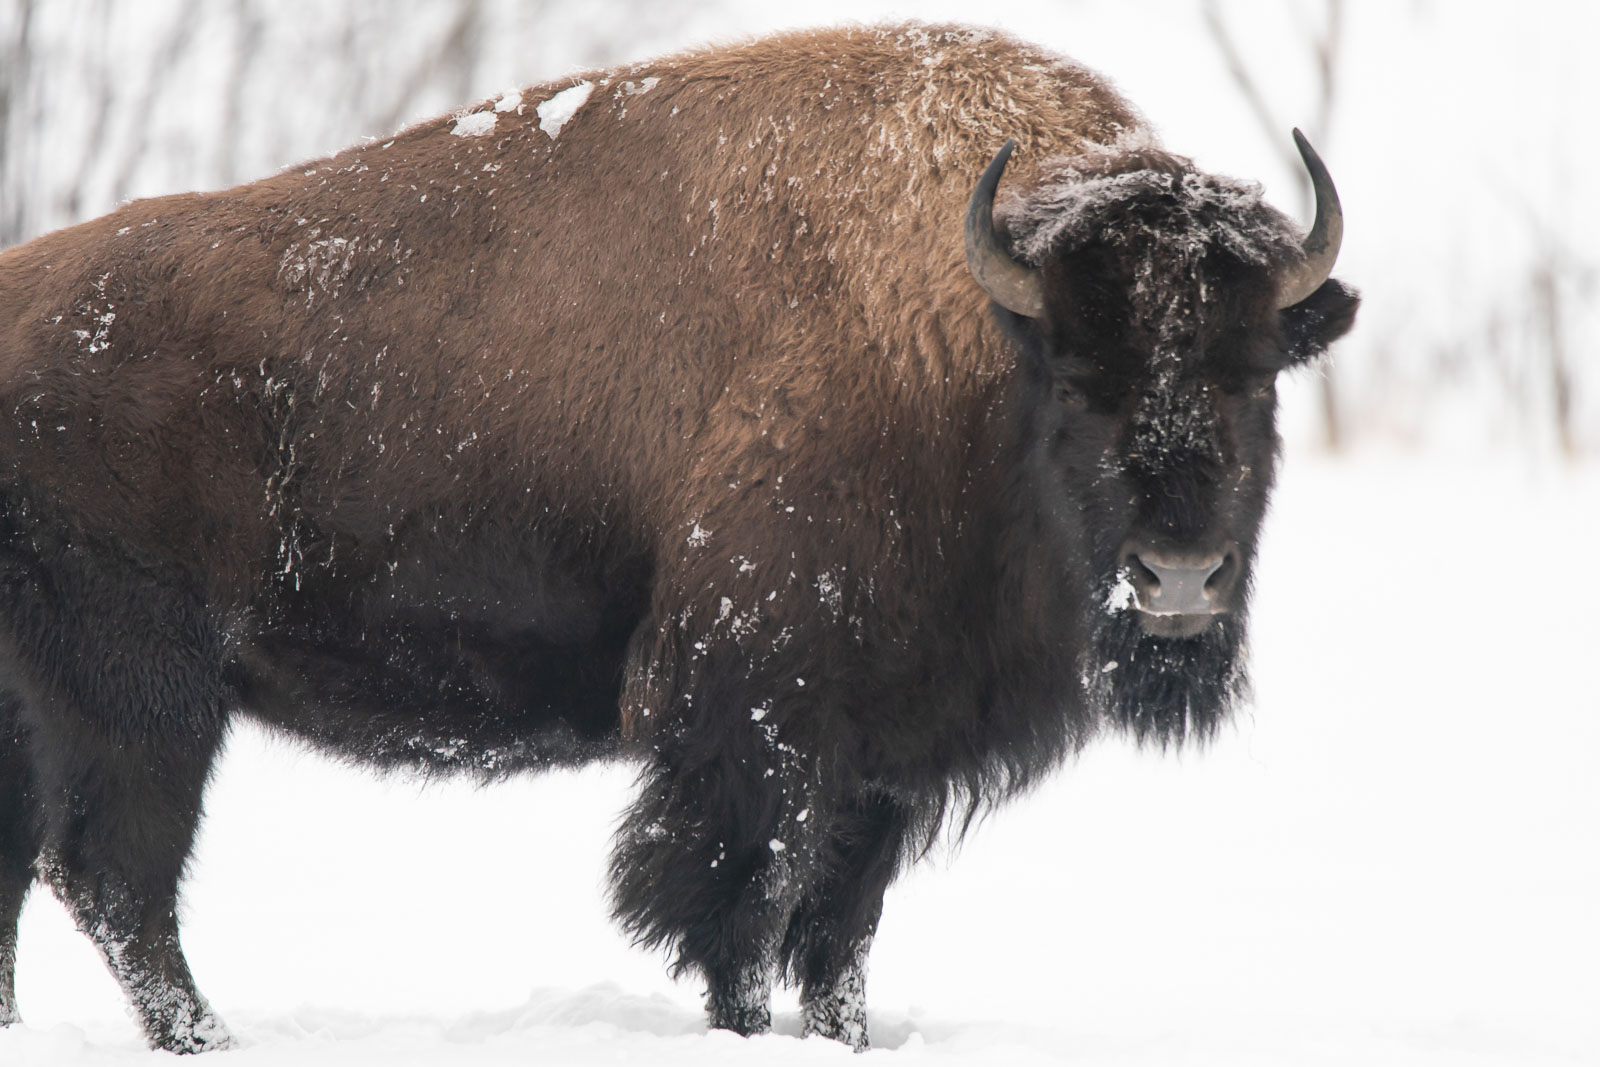 bison at winter in Canada